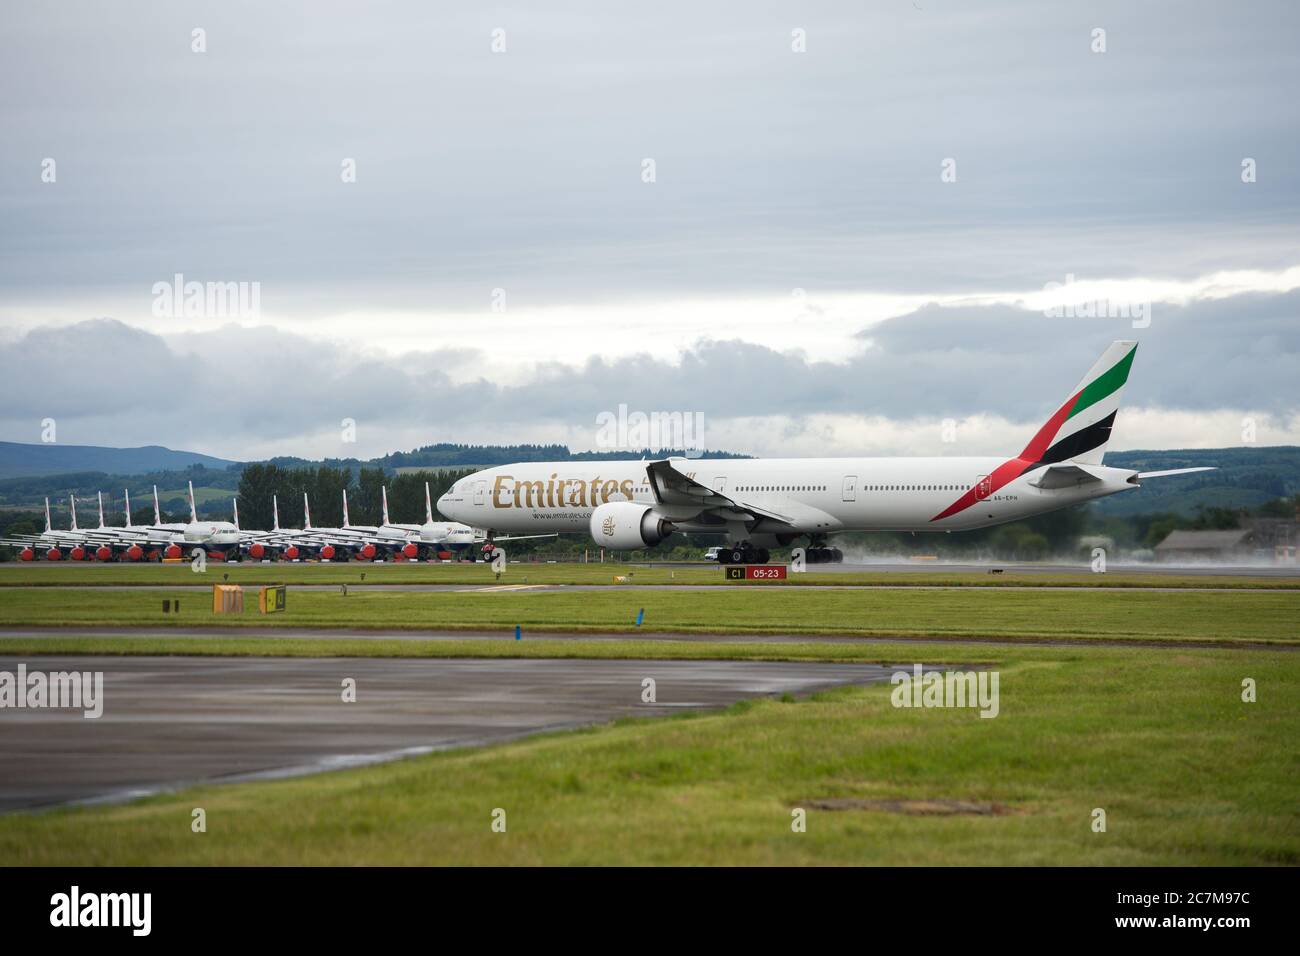 Glasgow, Scotland, UK. 17 July 2020. Pictured:  Second day back of Emirates flights back into Glasgow after the eaed coronavirus lockdown seen against a backdrop of grounded British Airways Airbus A319/A320/A321 aircraft, showing how bad the coronavirus (COVID19) crisis has affected the global airline industry. British Airways today axed all of its Boeing 747 services cutting back and have already axed a quarter of its staff due to the pandemic, however Emirates Airlines have said they are opening back up more routes. Credit: Colin Fisher/Alamy Live News. Stock Photo